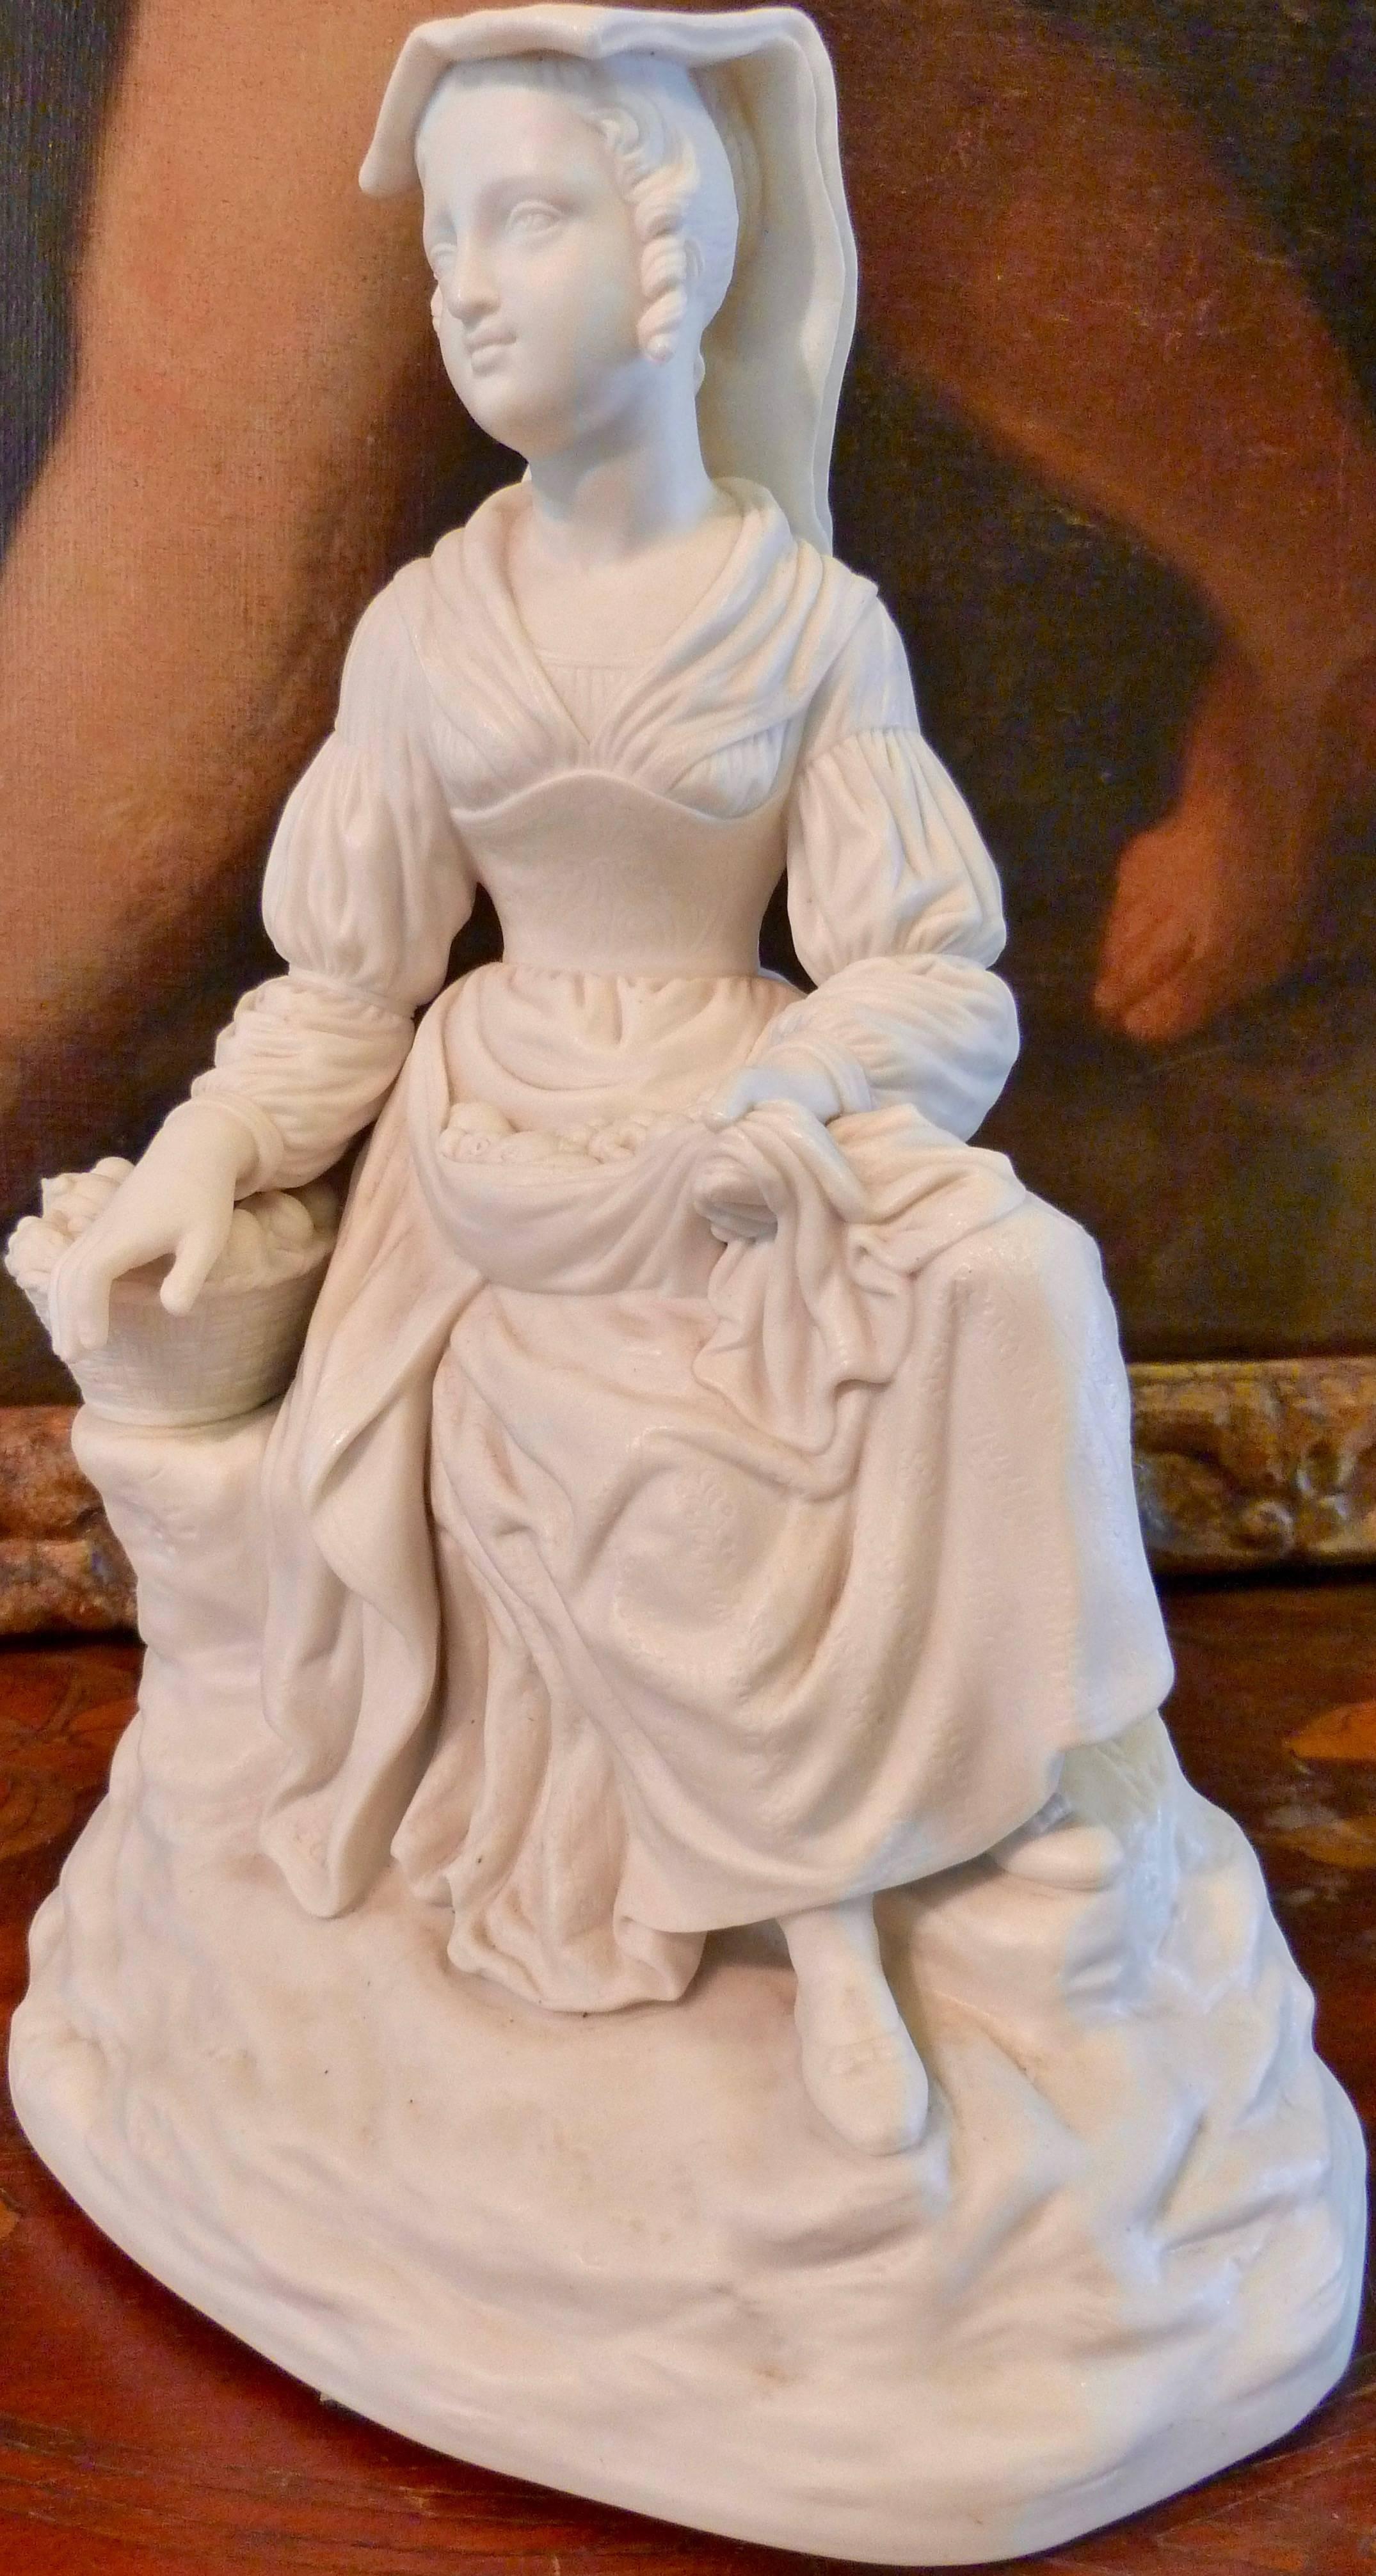 An exquisite and very detailed English grand tour Parian ware figure of an Italian fruit seller, late 19th century.